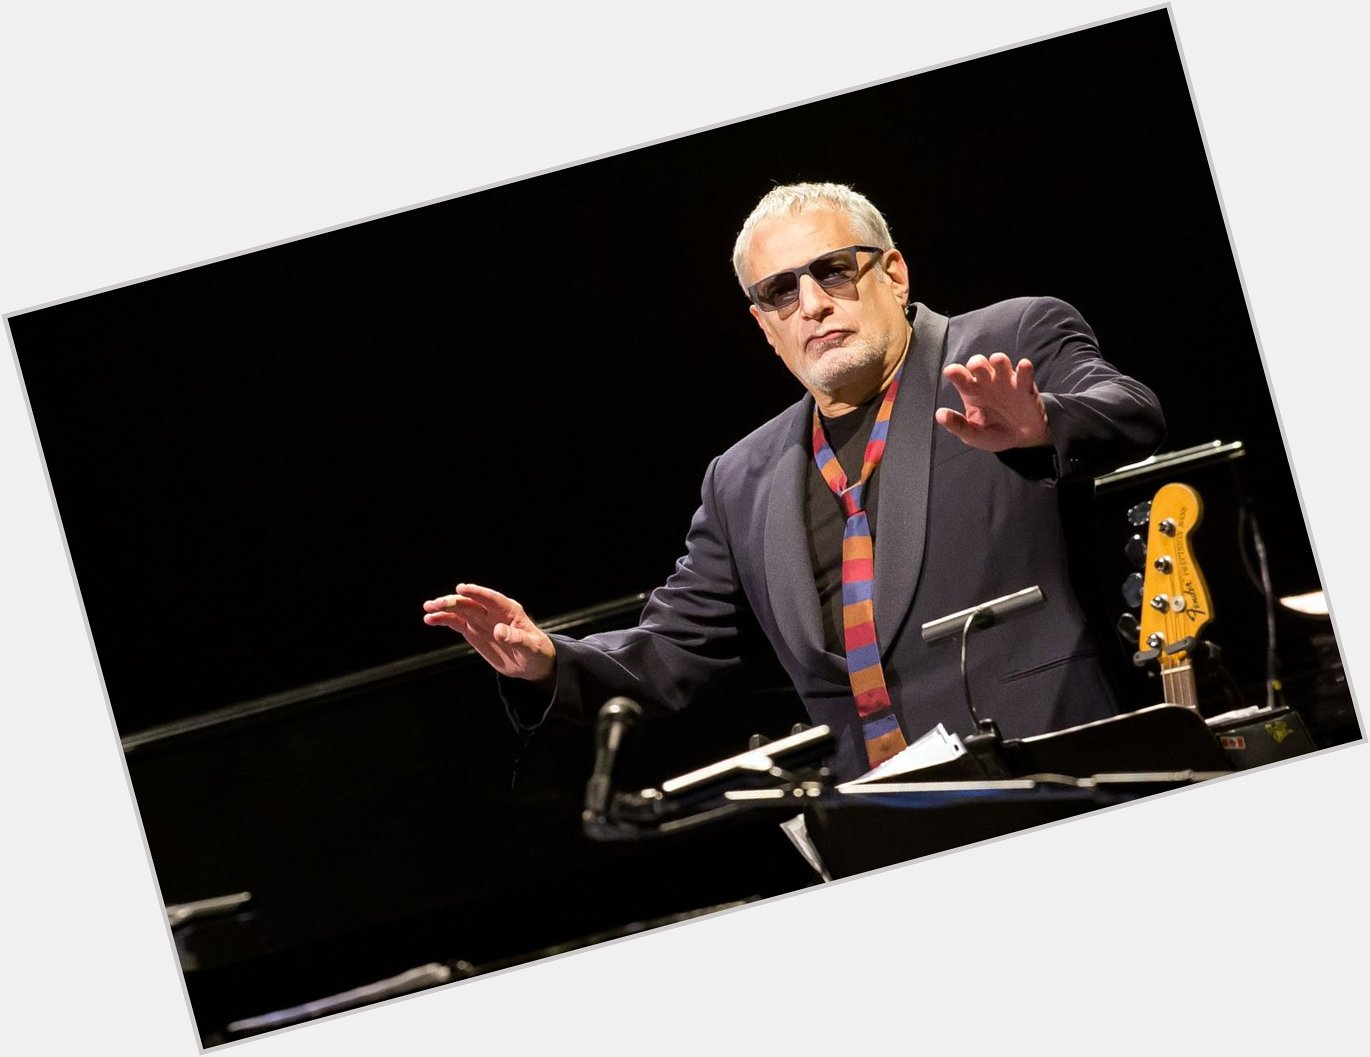 Happy 74 birthday to the Steely Dan singer and keyboardist Donald Fagen! 